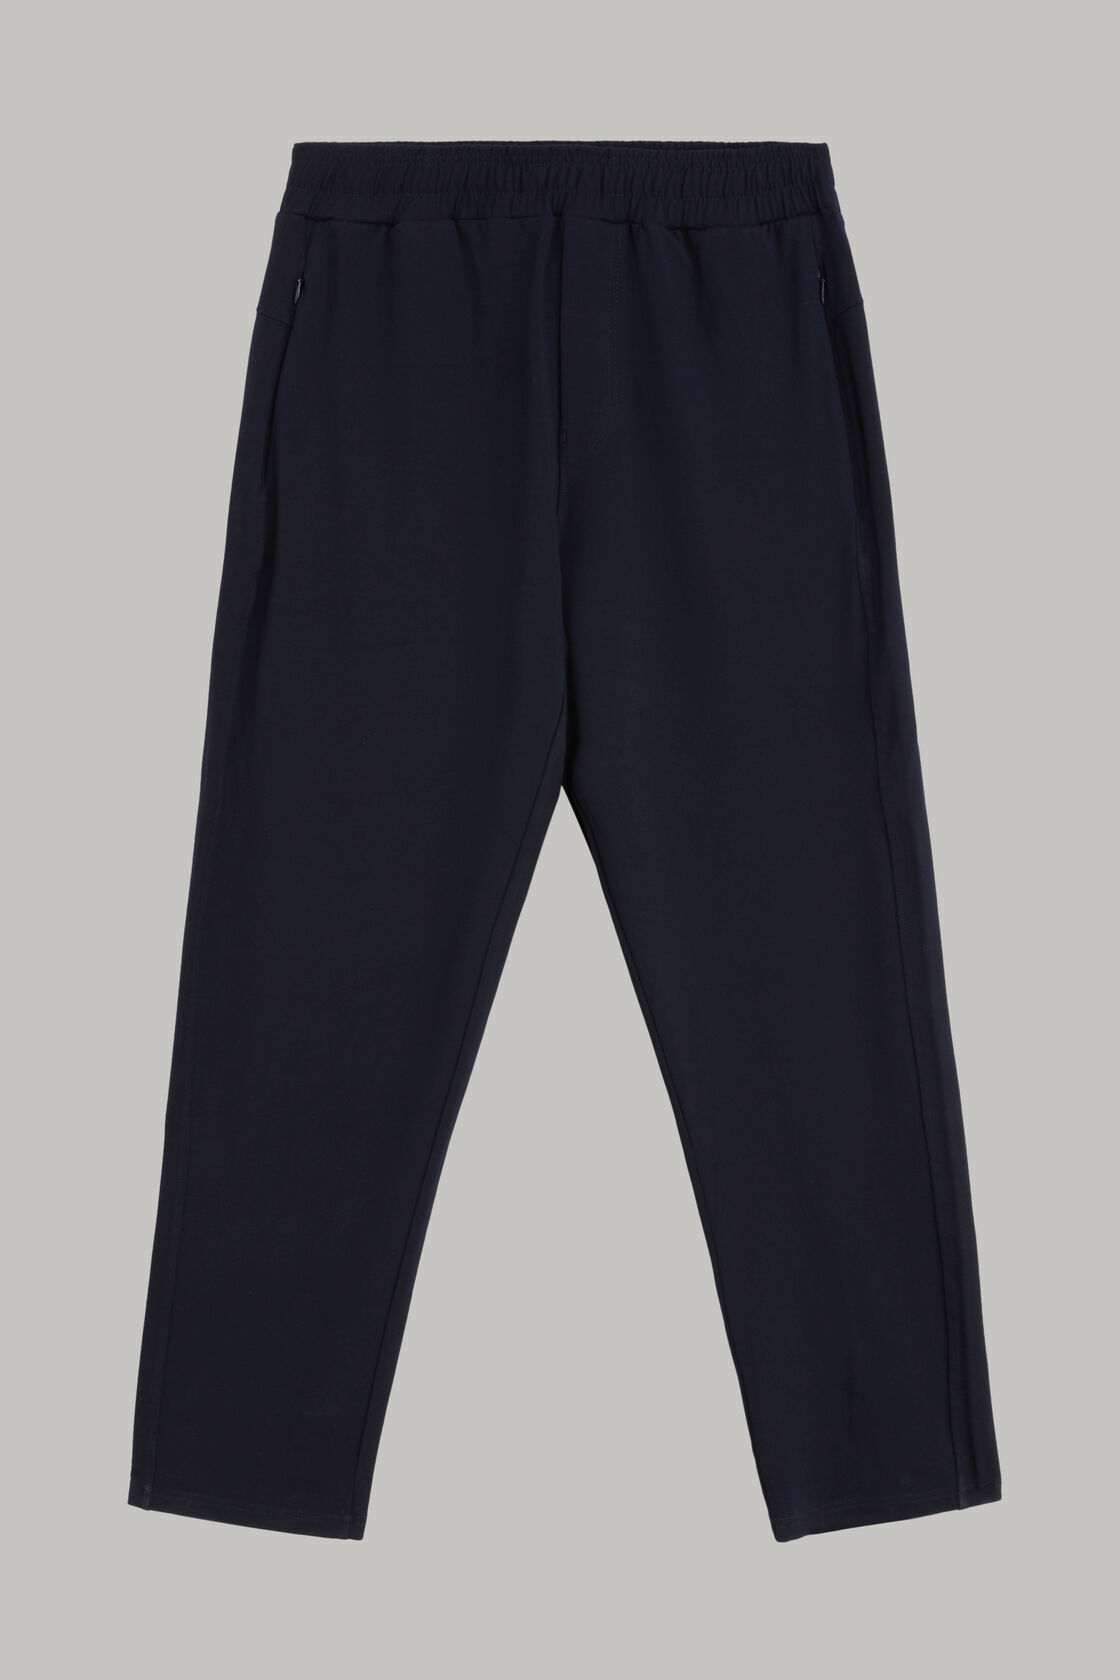 Stretch modal trousers with drawstring, , hi-res